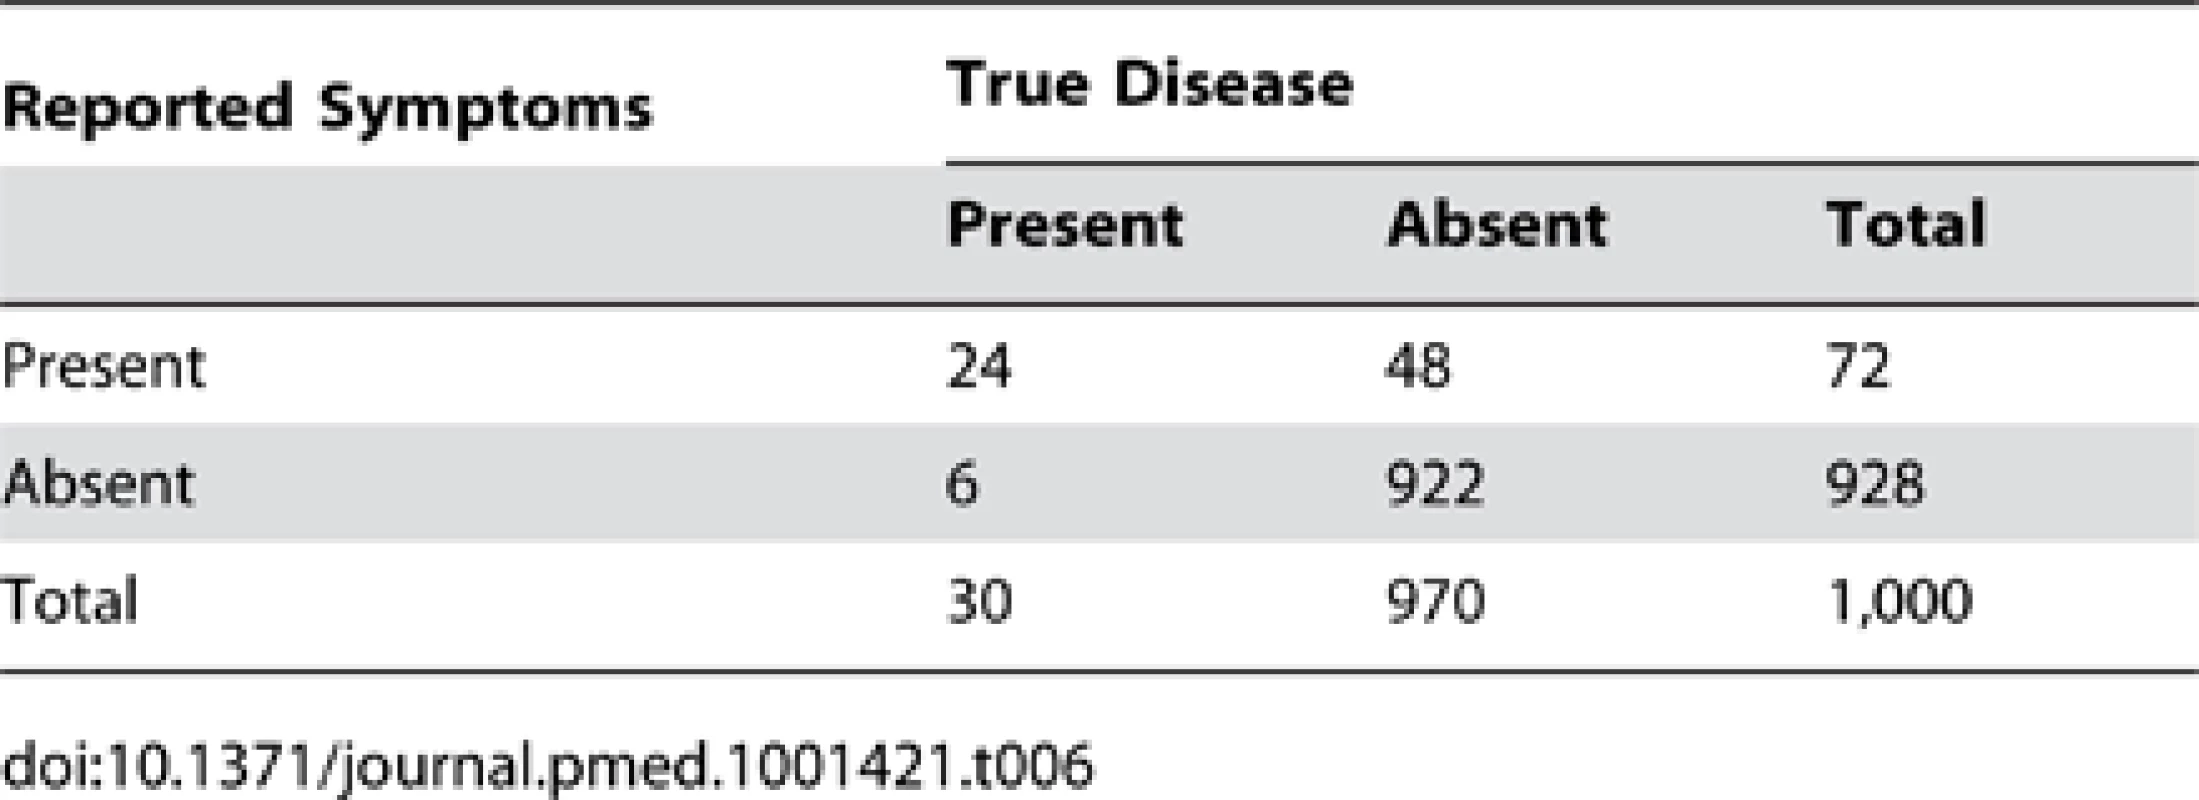 Distribution of cases of “true pneumonia” according to caregiver report of “suspected pneumonia” (test) and true disease status when test sensitivity is 80% and specificity is 95% with a four-week recall period.